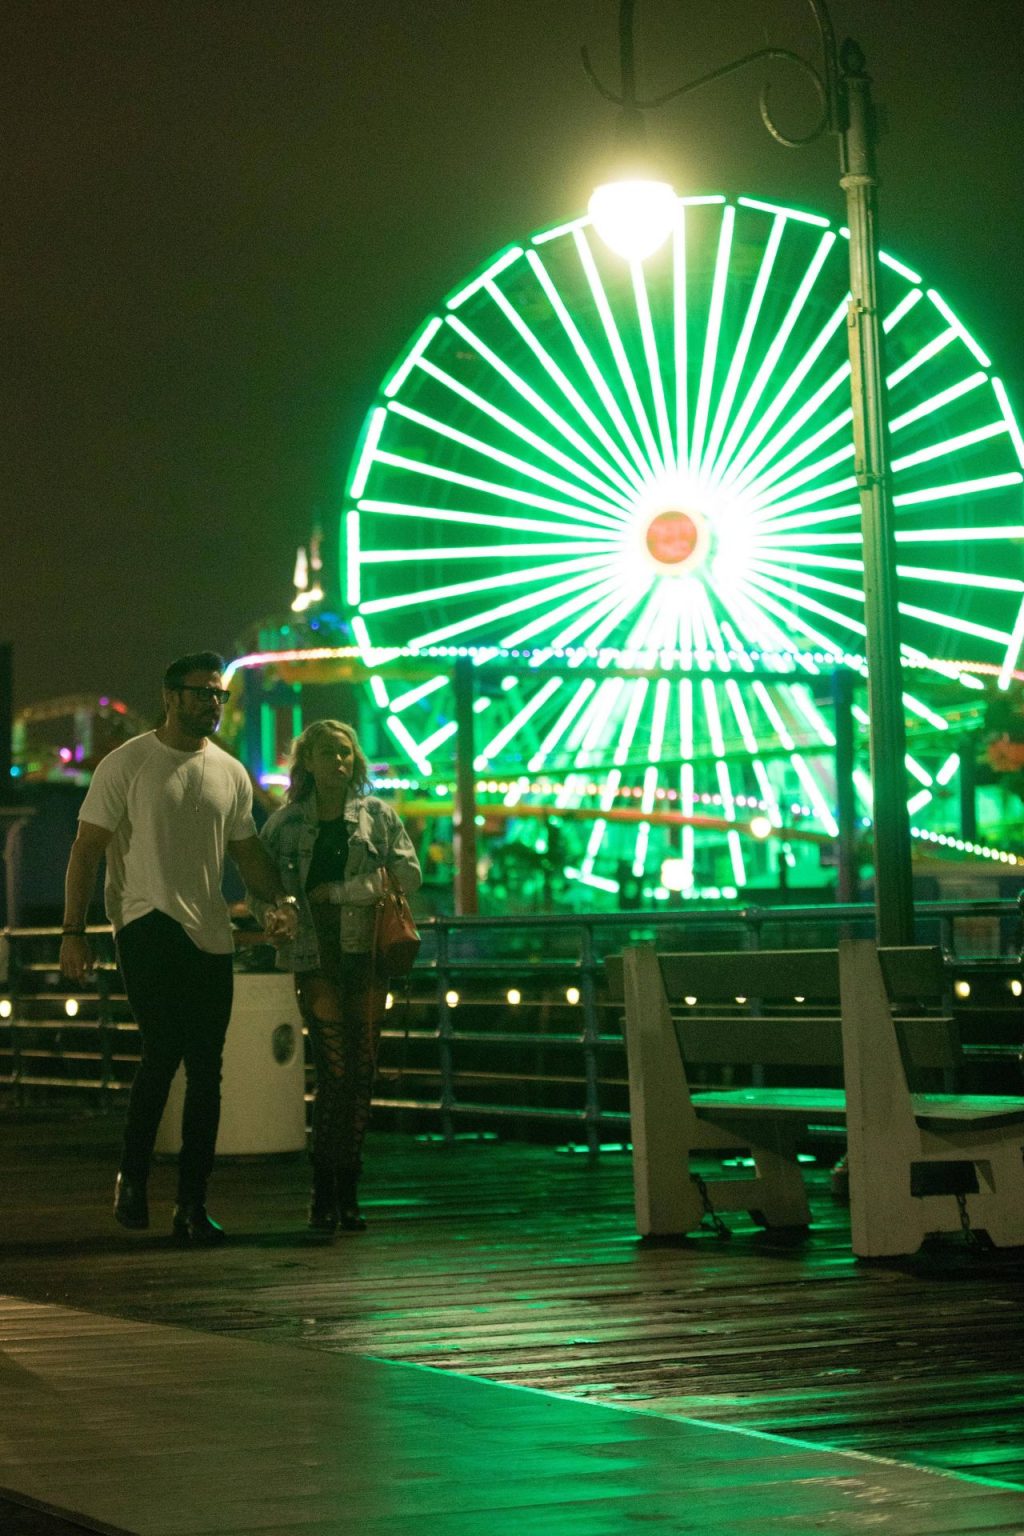 Chad Johnson &amp; Annalise Mishler are Seen On a Low Key Date at the Santa Monica Pier (27 Photos)